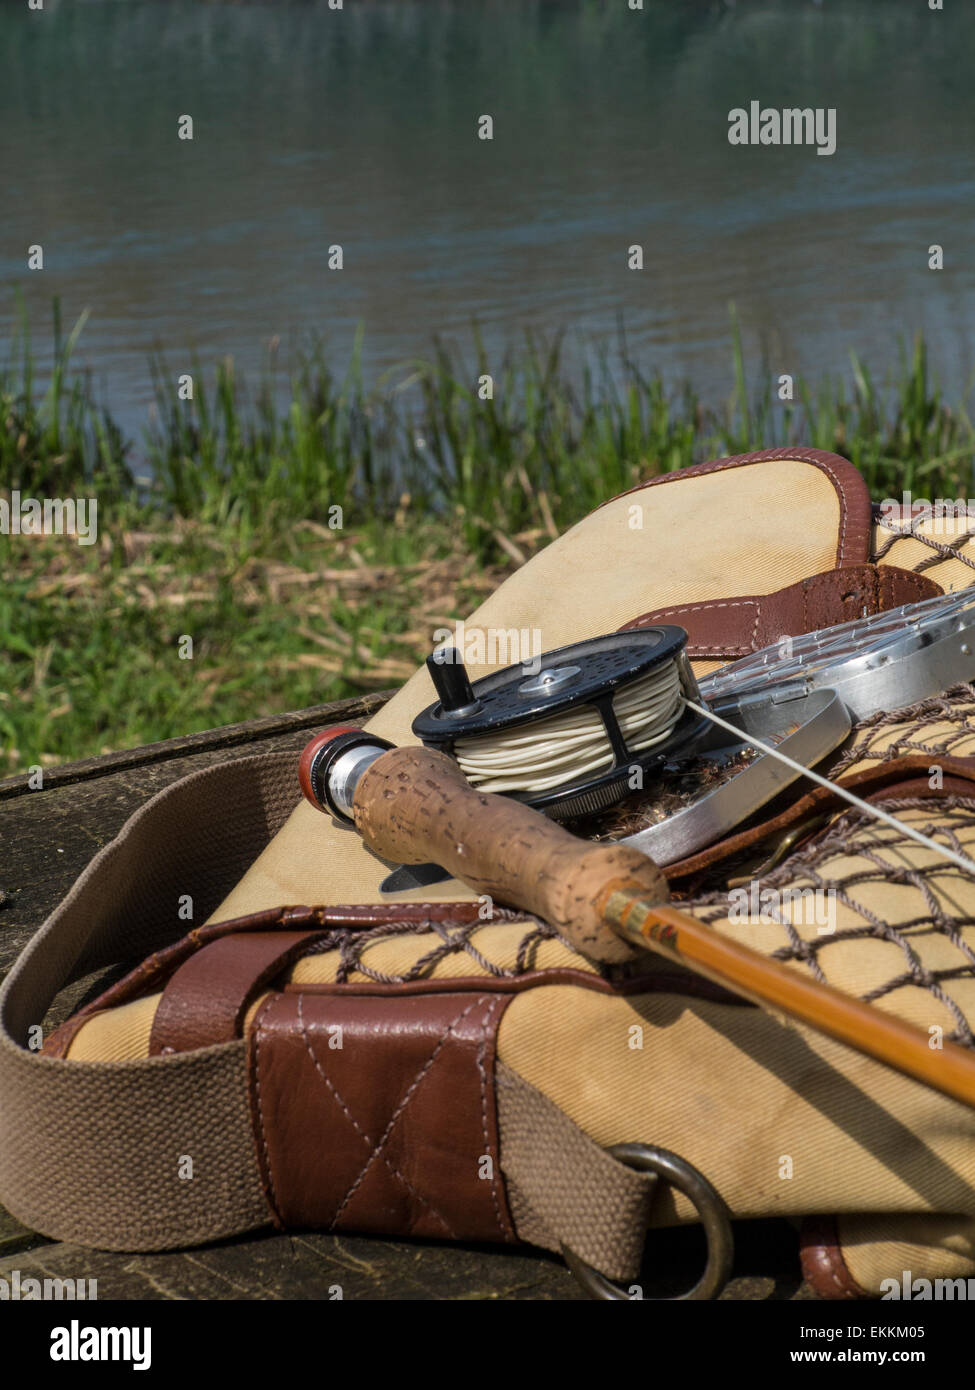 https://c8.alamy.com/comp/EKKM05/traditional-old-vintage-fly-fishing-tackle-with-the-river-in-the-background-EKKM05.jpg